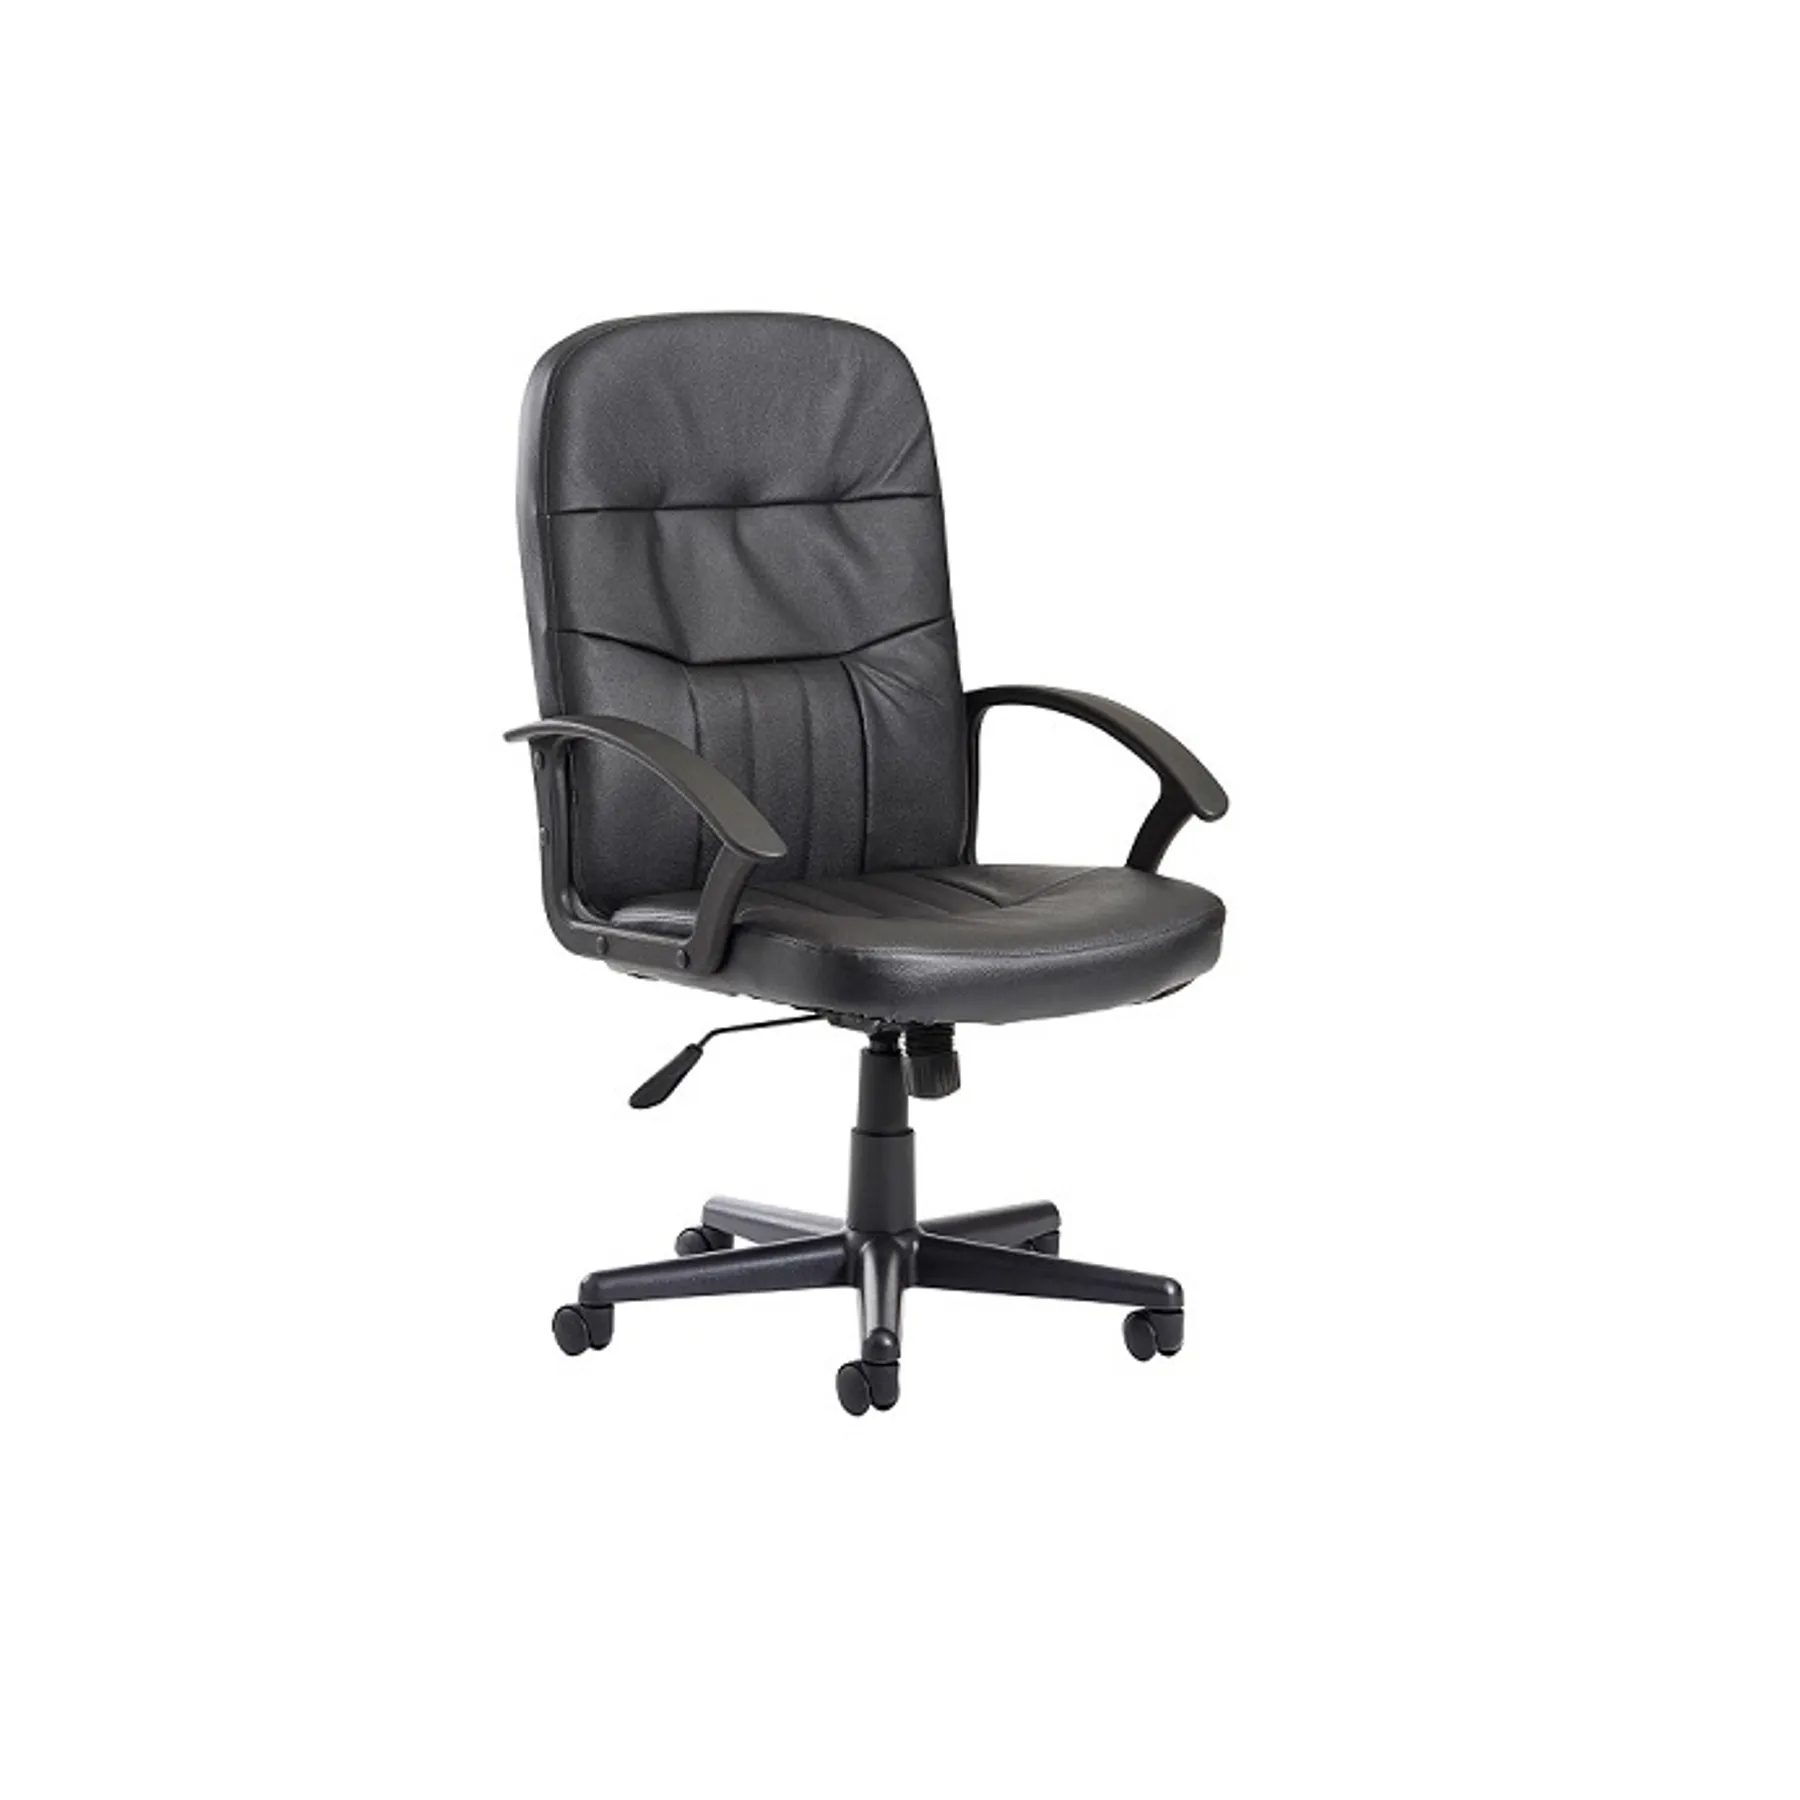 LOF Direct Dams Cavalier Managers Chair CAV300 T1 Black Leather